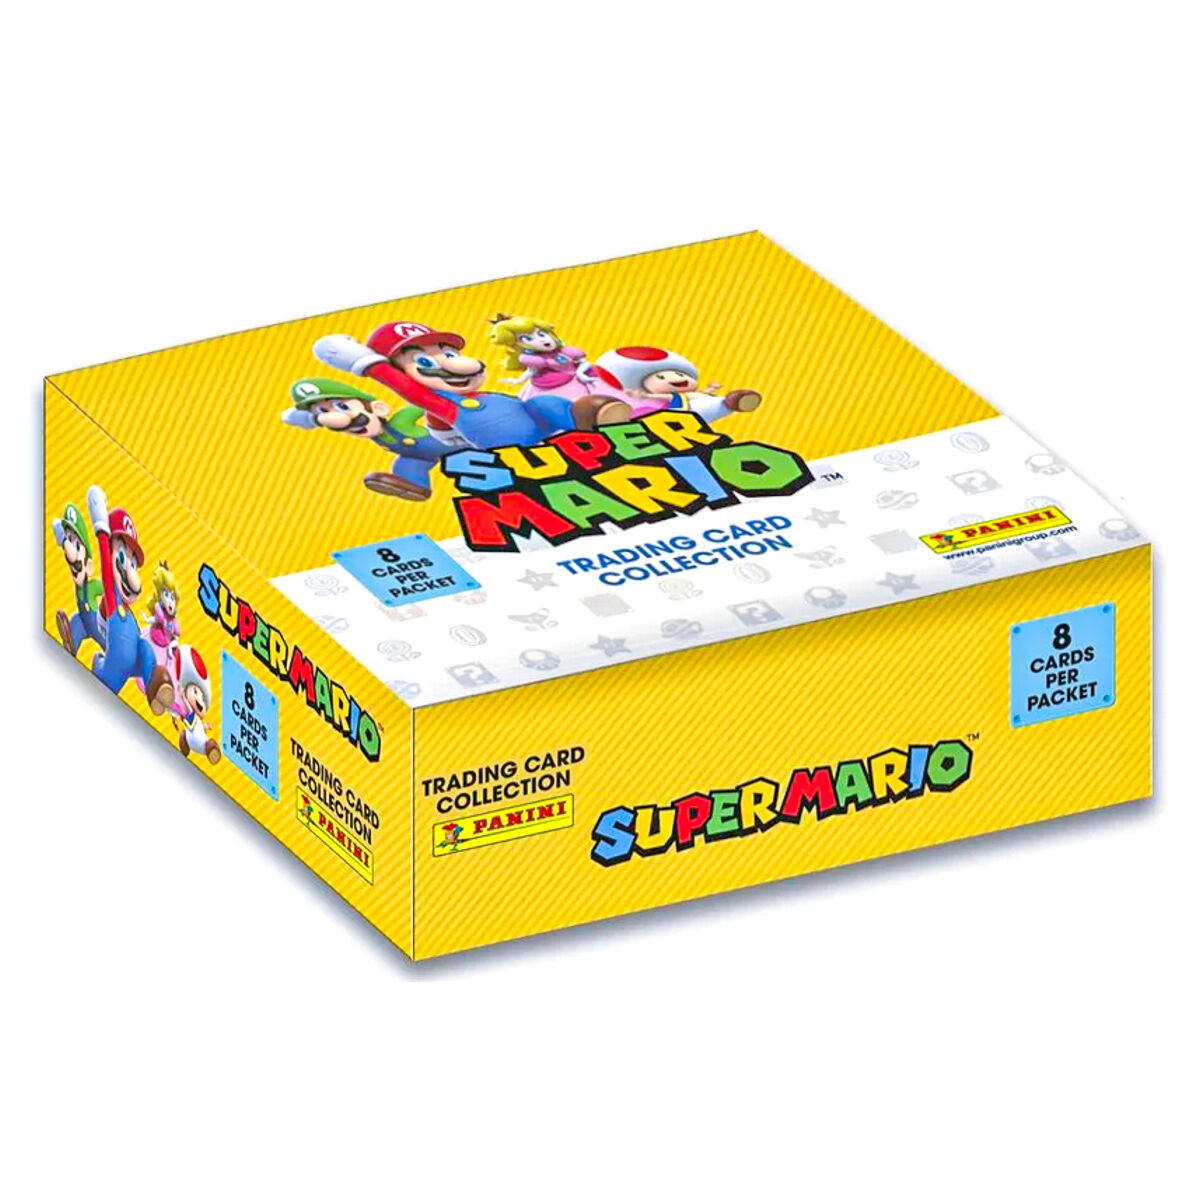 Panini Super Mario Trading Card Collection 18 Packs Booster Box New Sealed